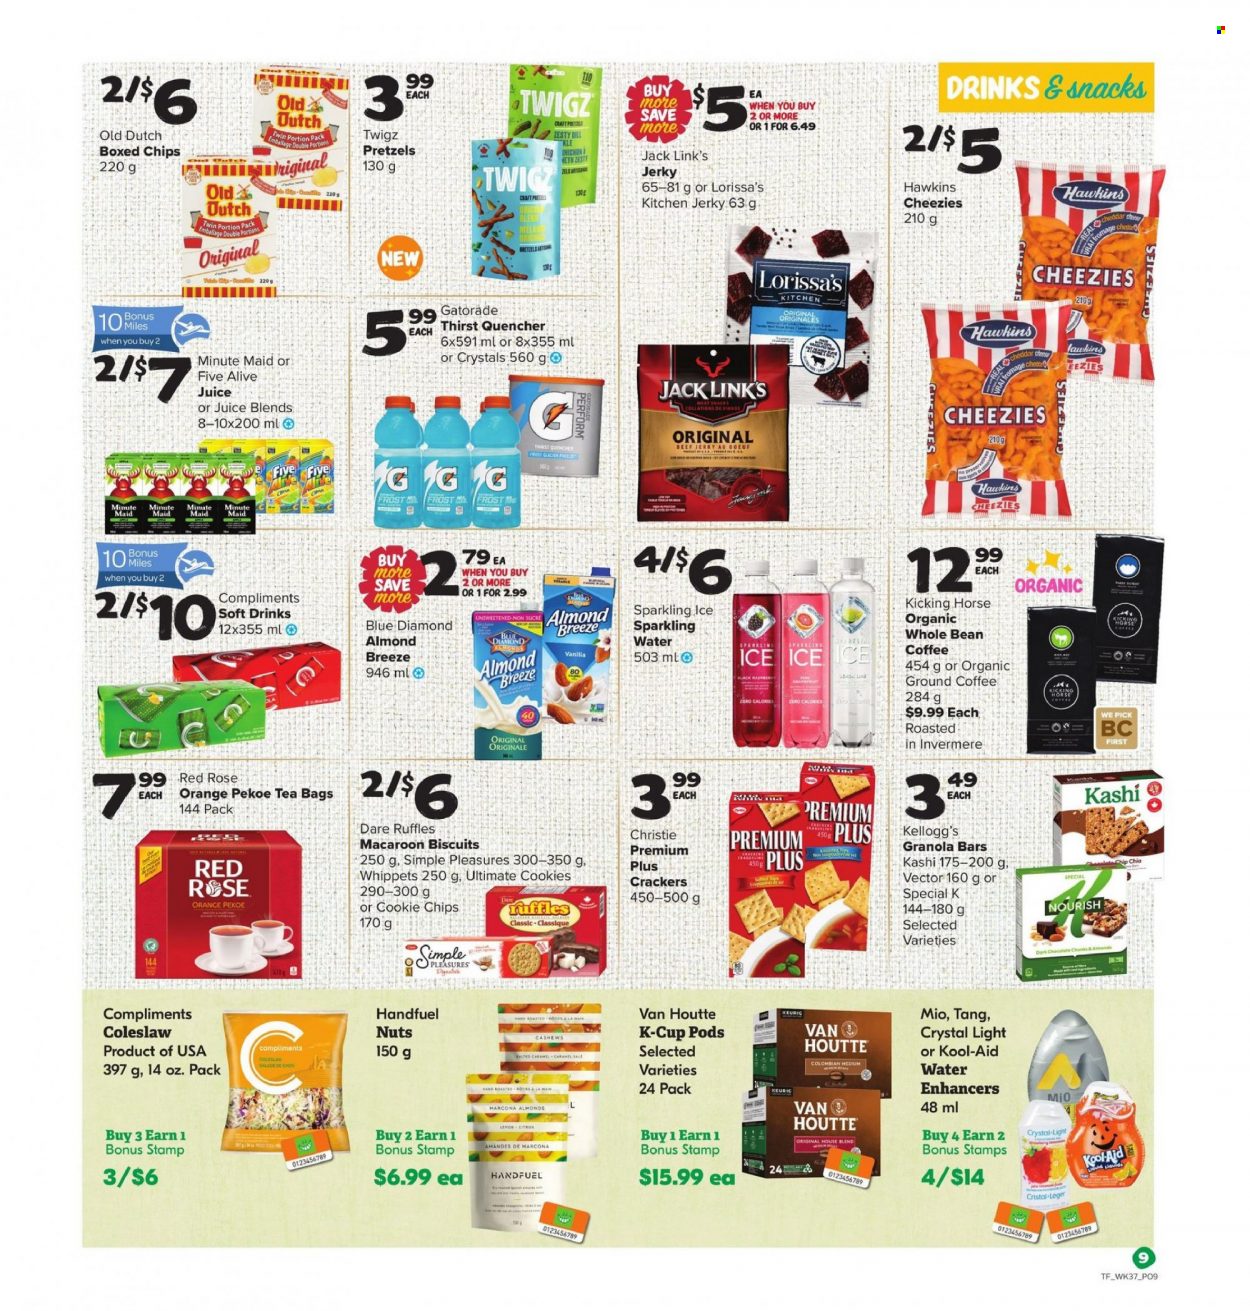 thumbnail - Thrifty Foods Flyer - January 06, 2022 - January 12, 2022 - Sales products - pretzels, coleslaw, beef jerky, jerky, Almond Breeze, cookies, crackers, Kellogg's, biscuit, Ruffles, Jack Link's, granola bar, dill, cashews, Blue Diamond, juice, soft drink, Gatorade, fruit punch, tea bags, coffee, ground coffee, coffee capsules, K-Cups, Keurig, wine, rosé wine, chips, oranges. Page 13.